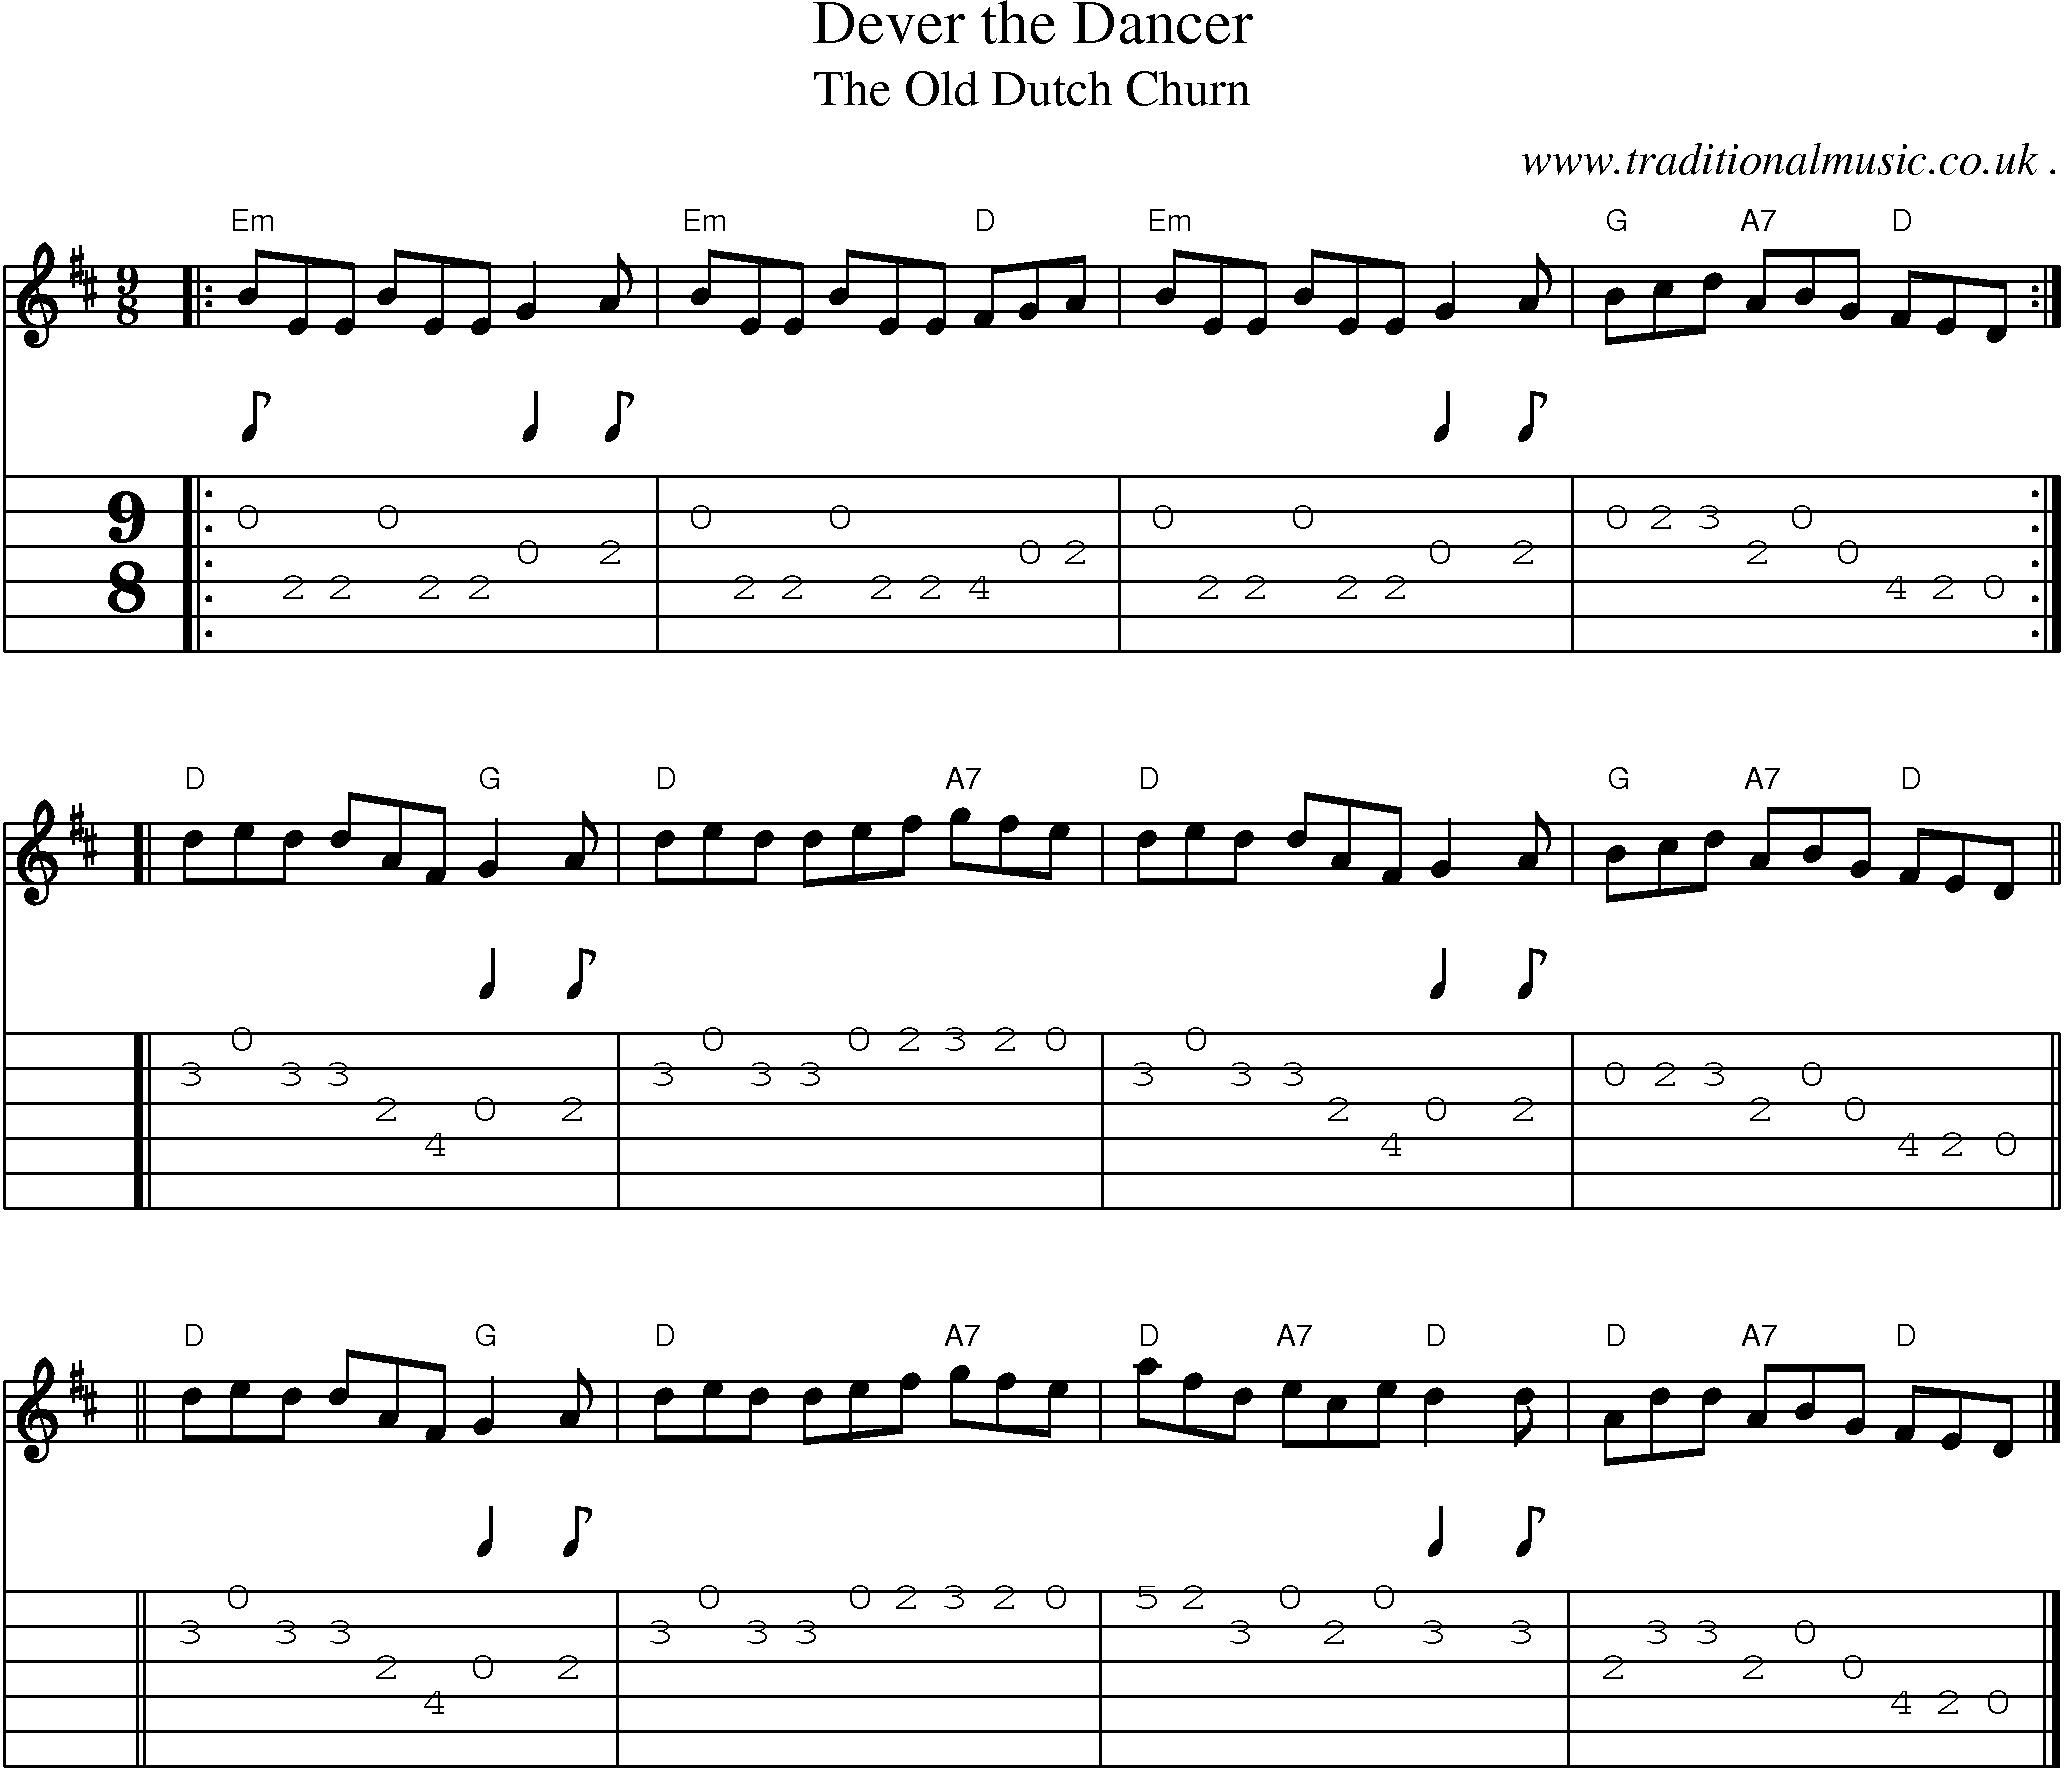 Sheet-music  score, Chords and Guitar Tabs for Dever The Dancer